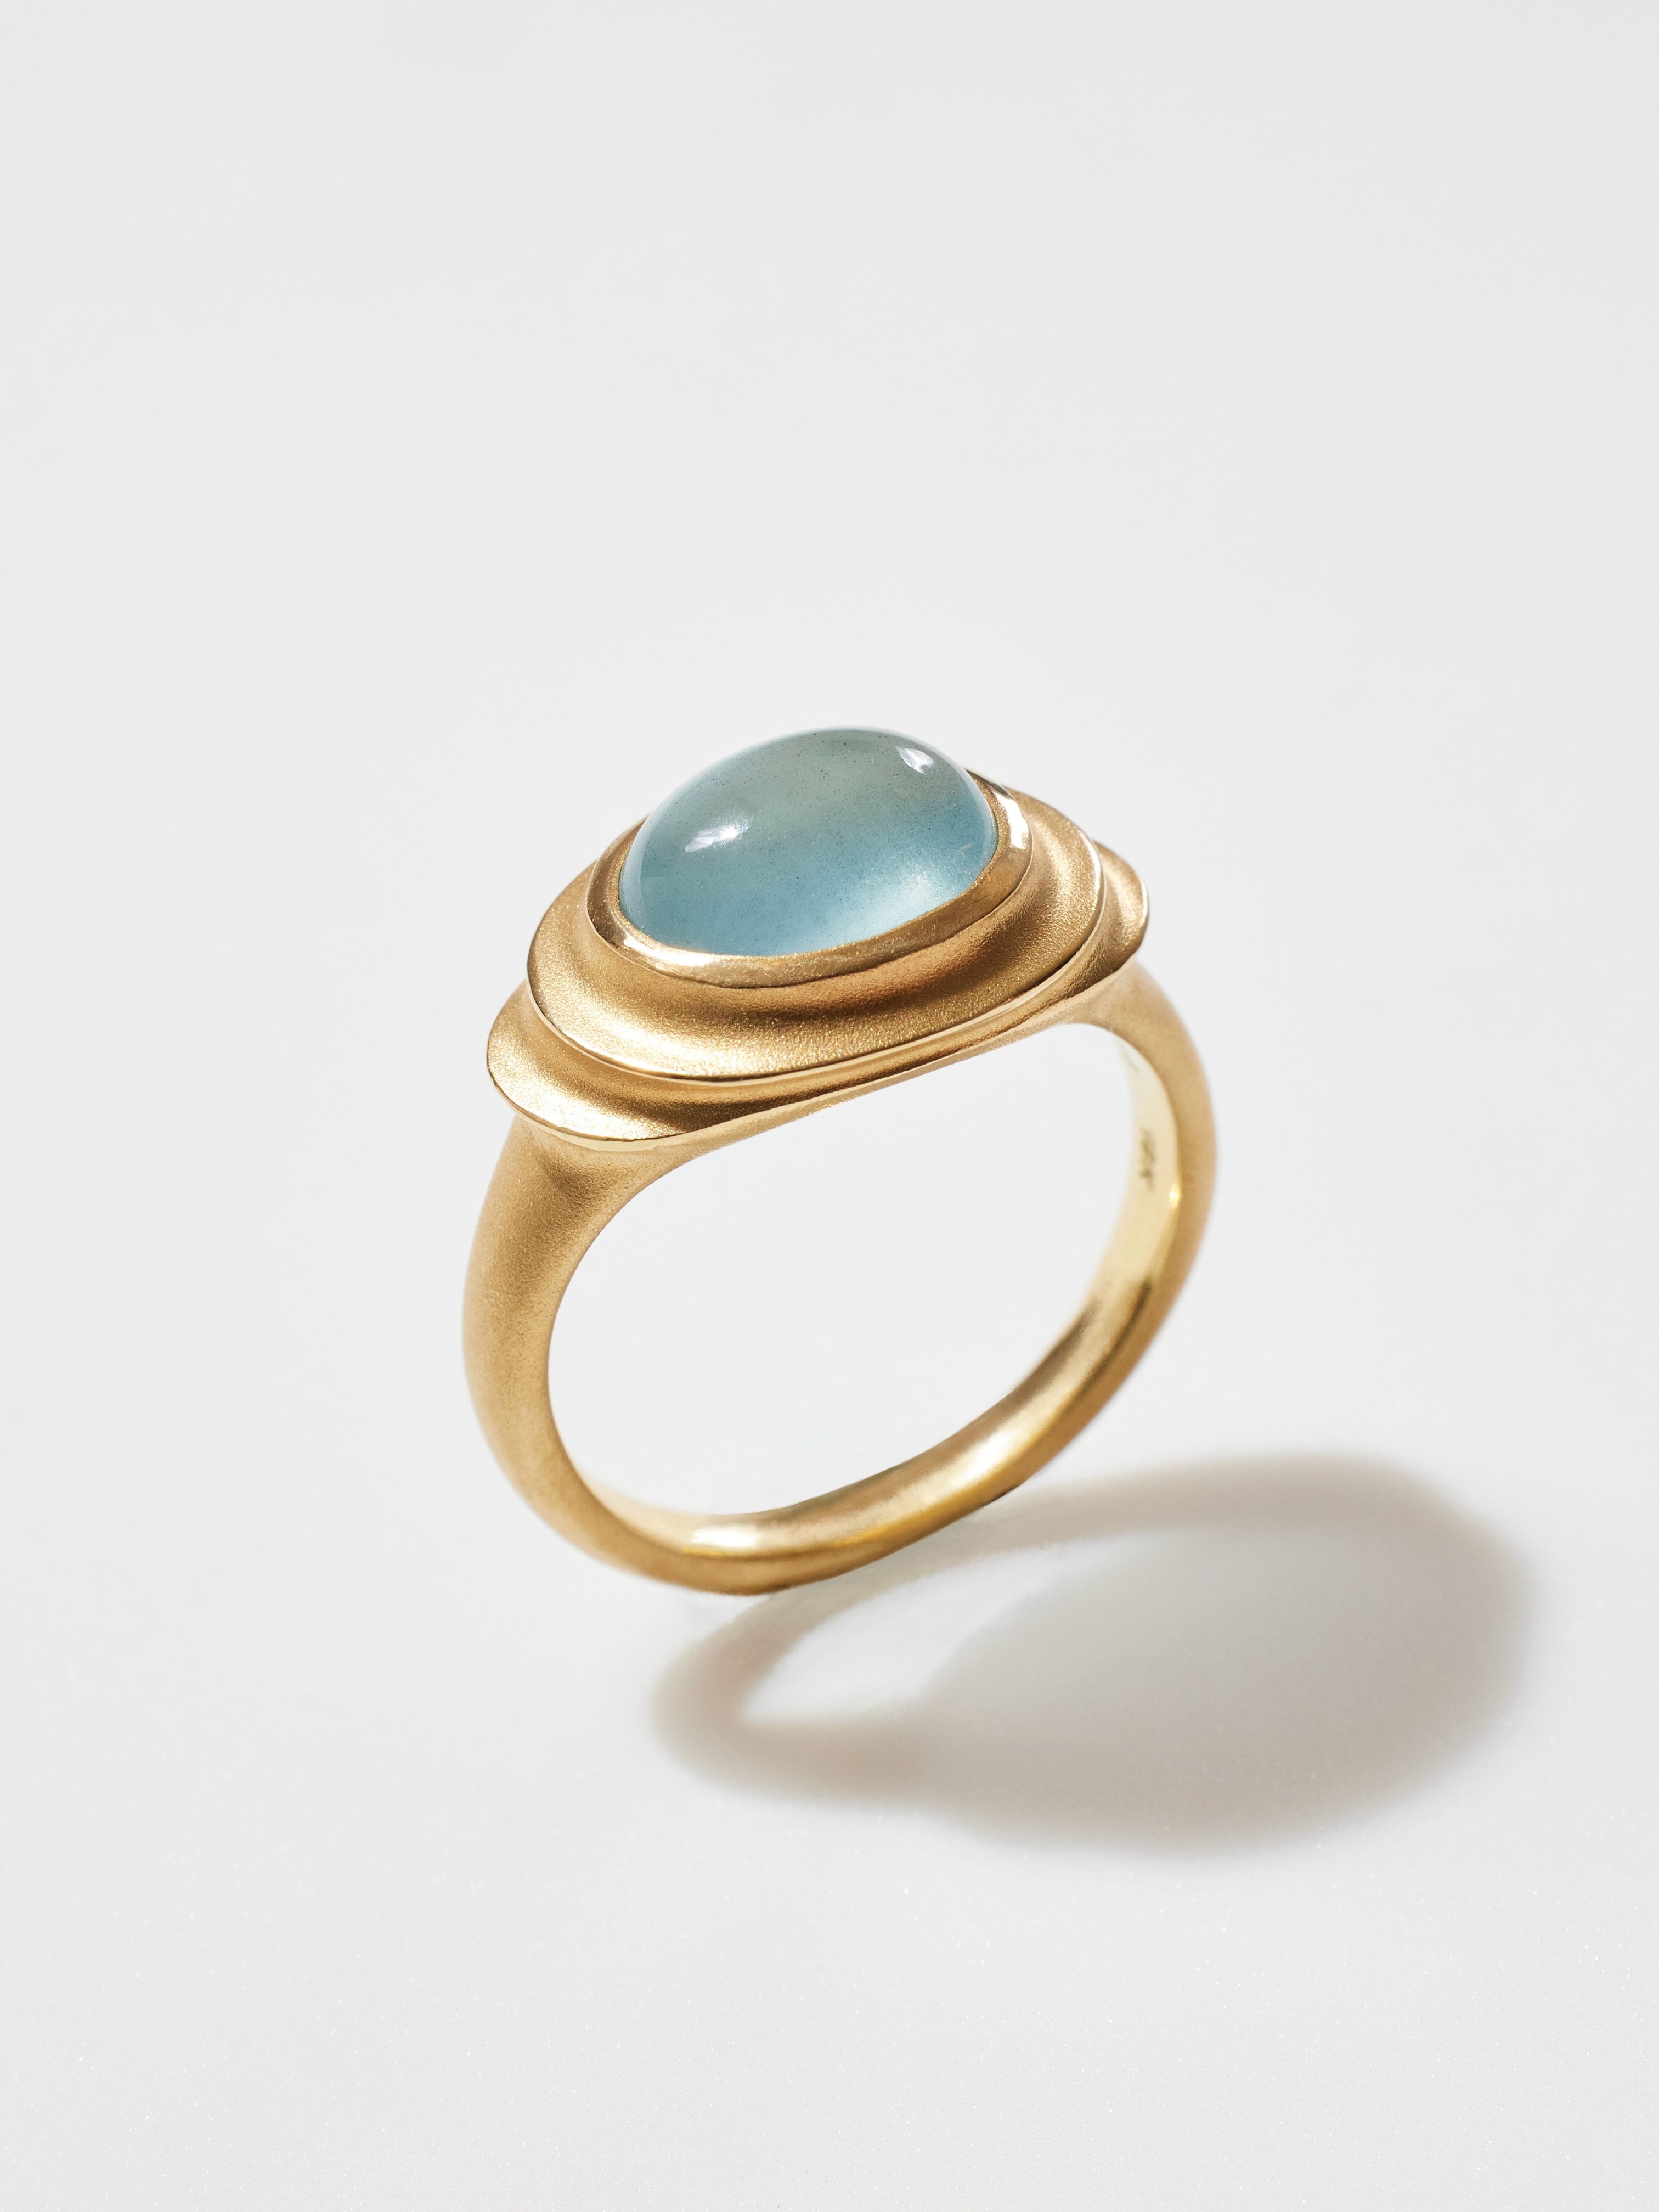 Aquamarine Màre Ring in 18k Royal Gold, Size 6.75